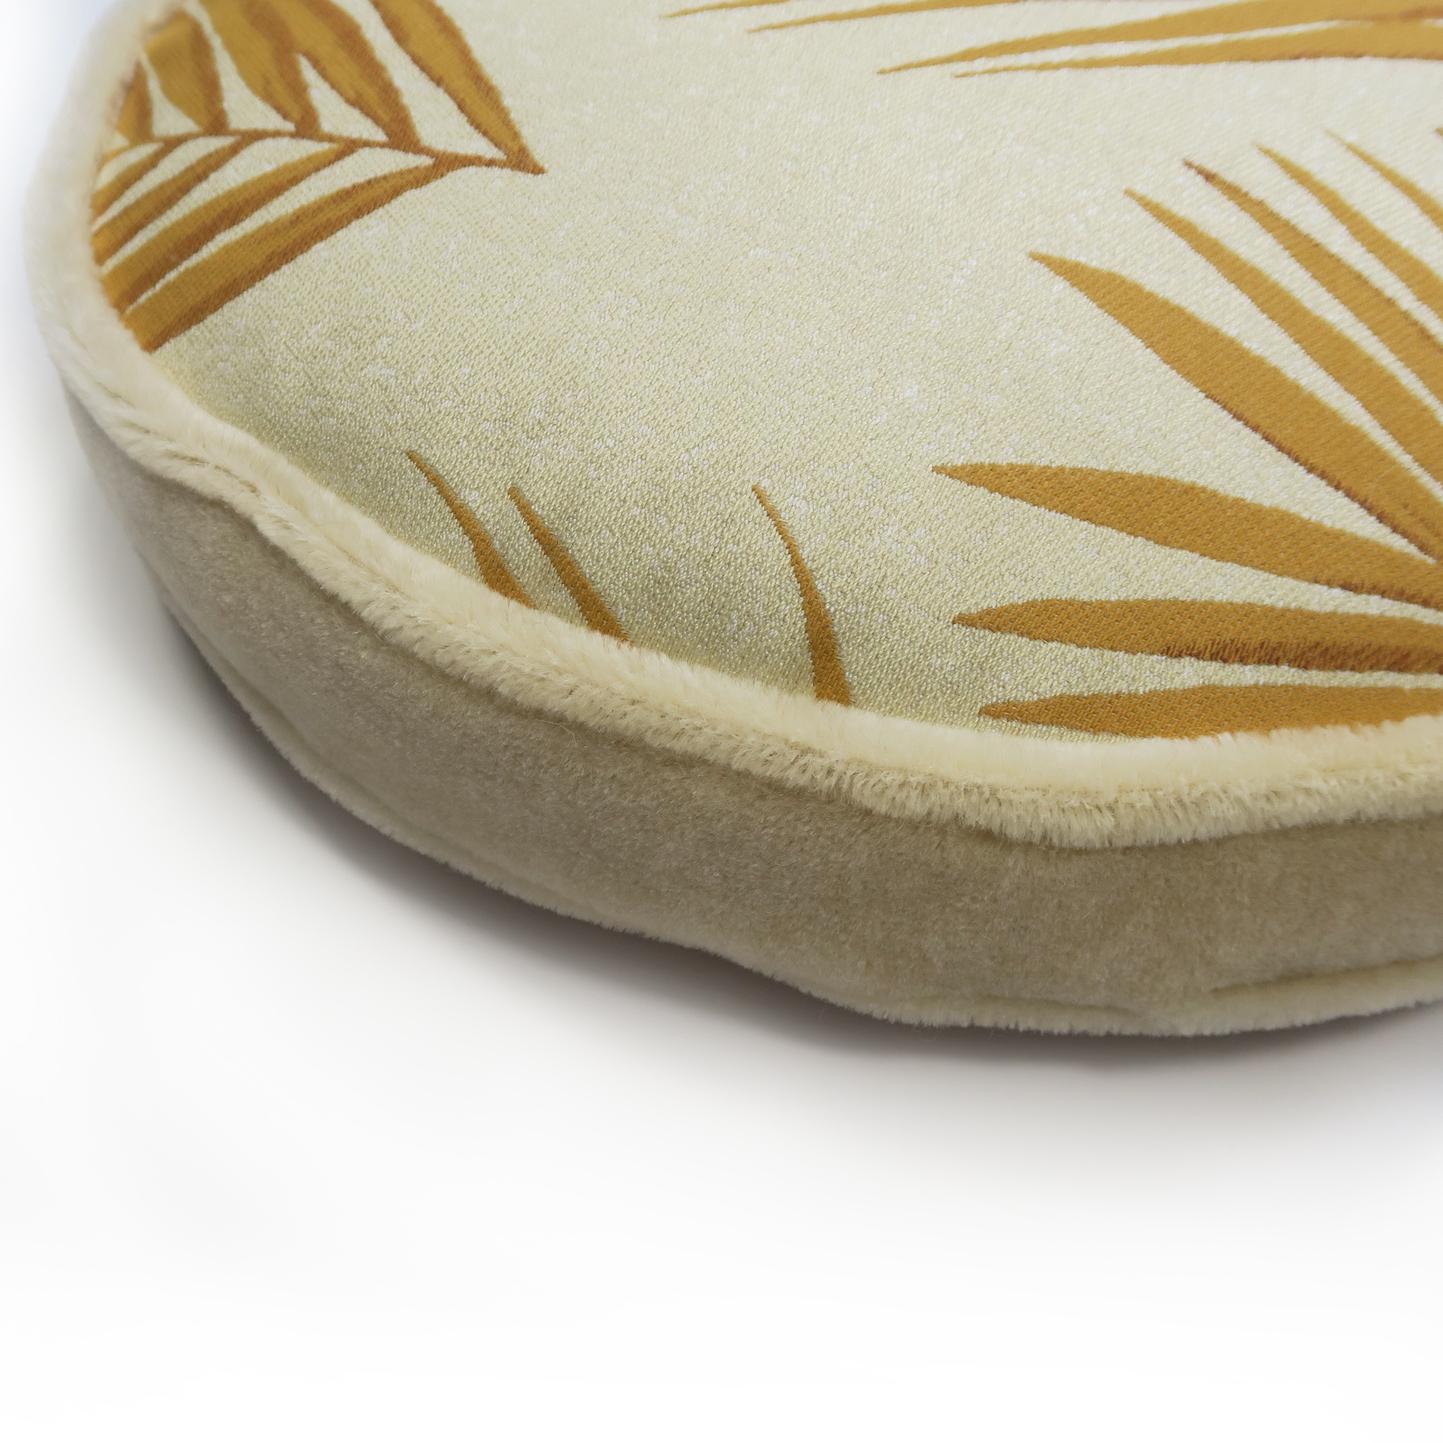 A tropical pattern in subtle tones, our Bamboo Leaf fabric upholstery is warm and playful. Harking to a different environment, the cushion helps to bring a natural look to both interior and exterior settings. In its rounded shape and yellow hue,